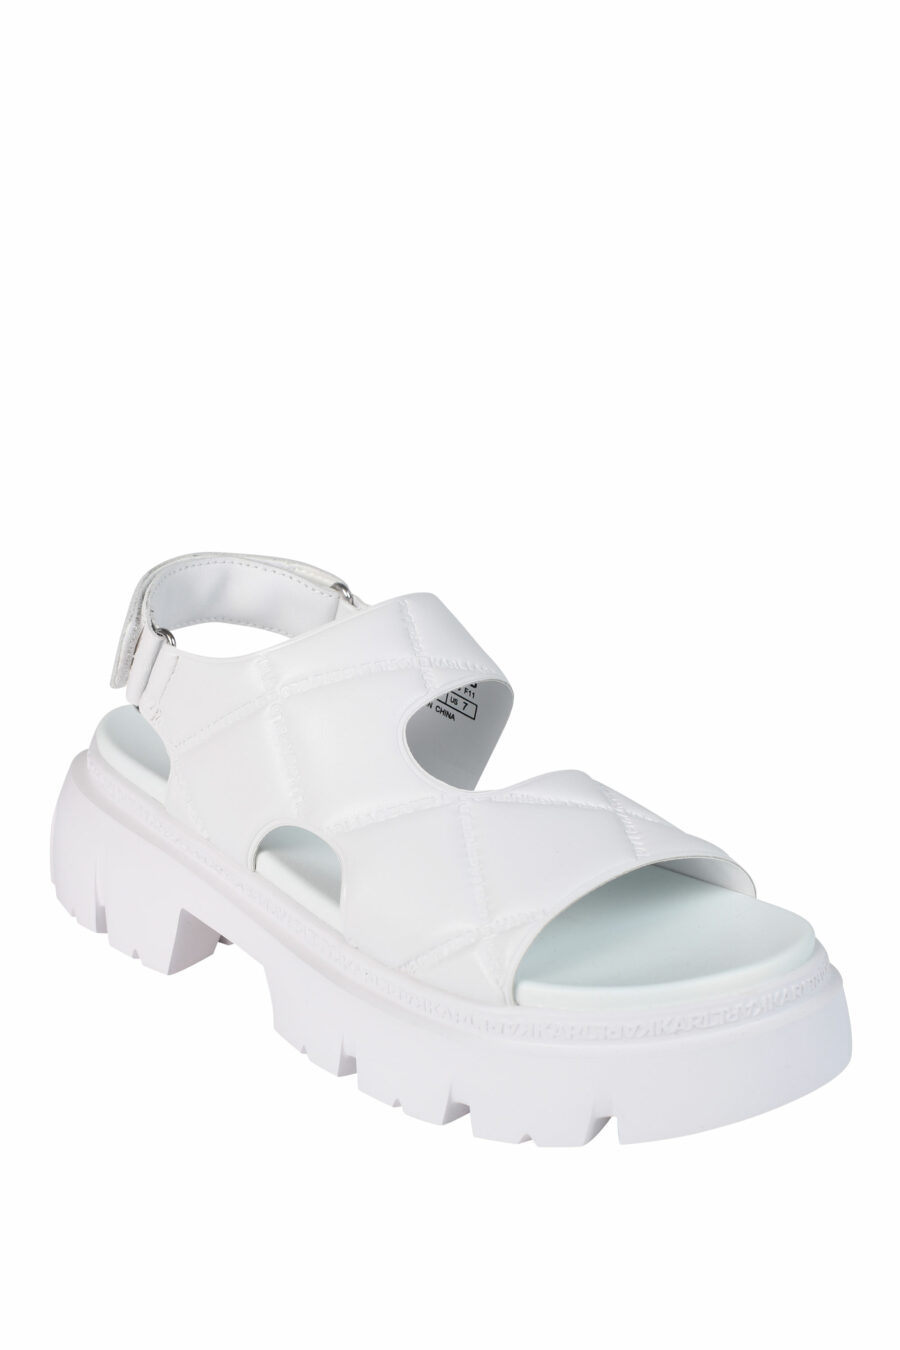 White cushioned crossover sandals with platform and logo - 5059529245473 2